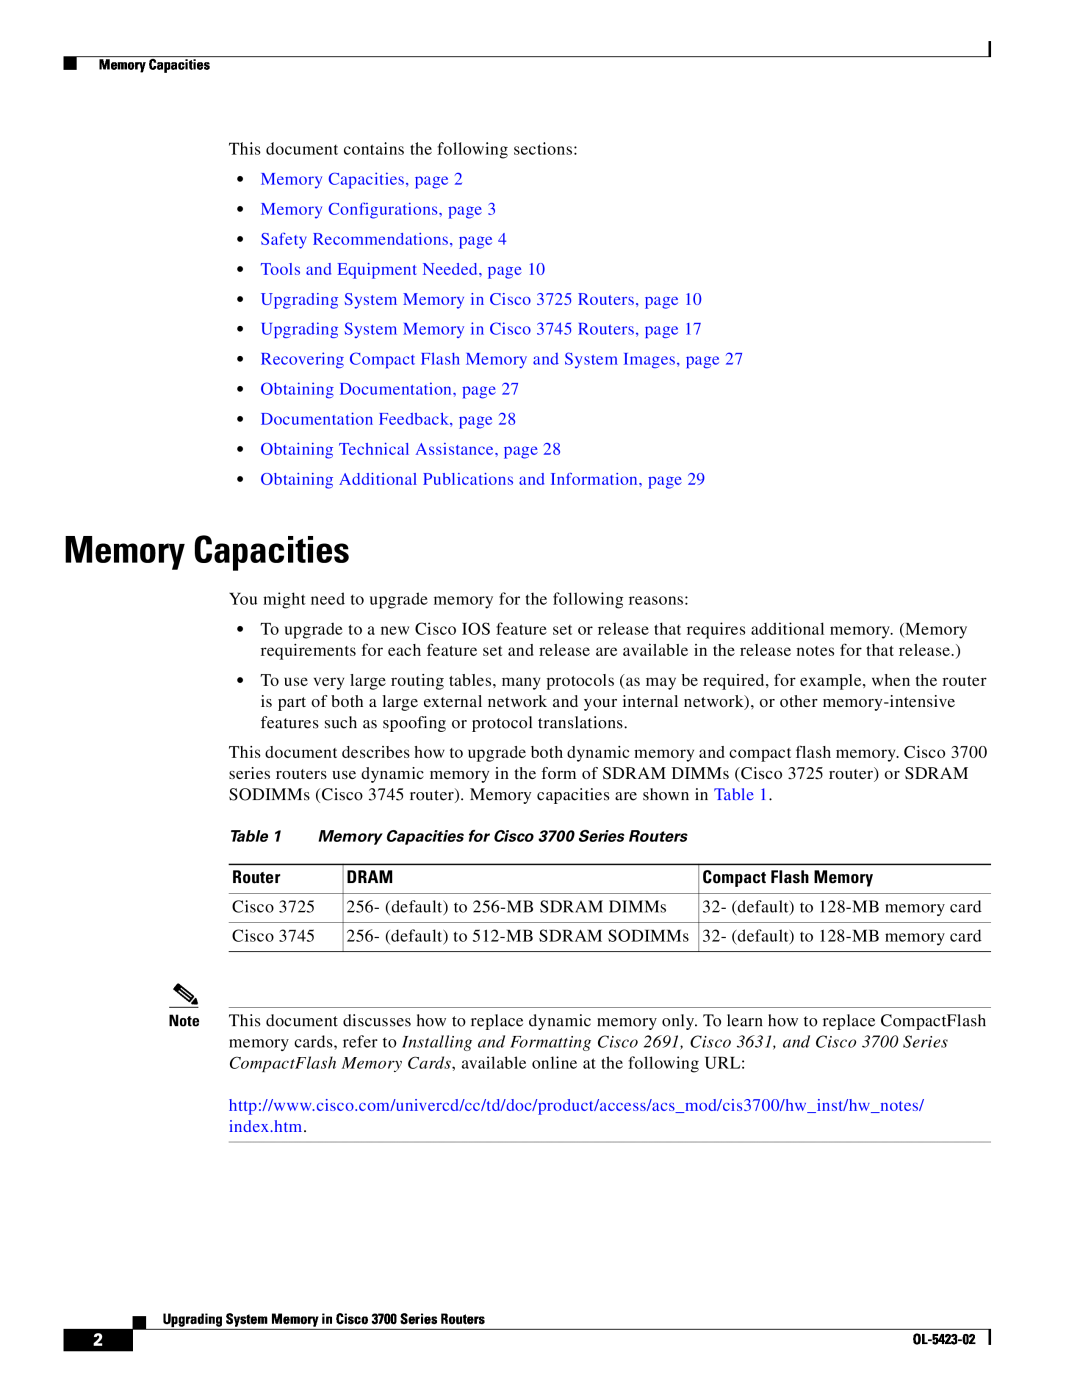 Cisco Systems 3745 Series Memory Capacities, page Memory Configurations, page, Obtaining Technical Assistance, page 